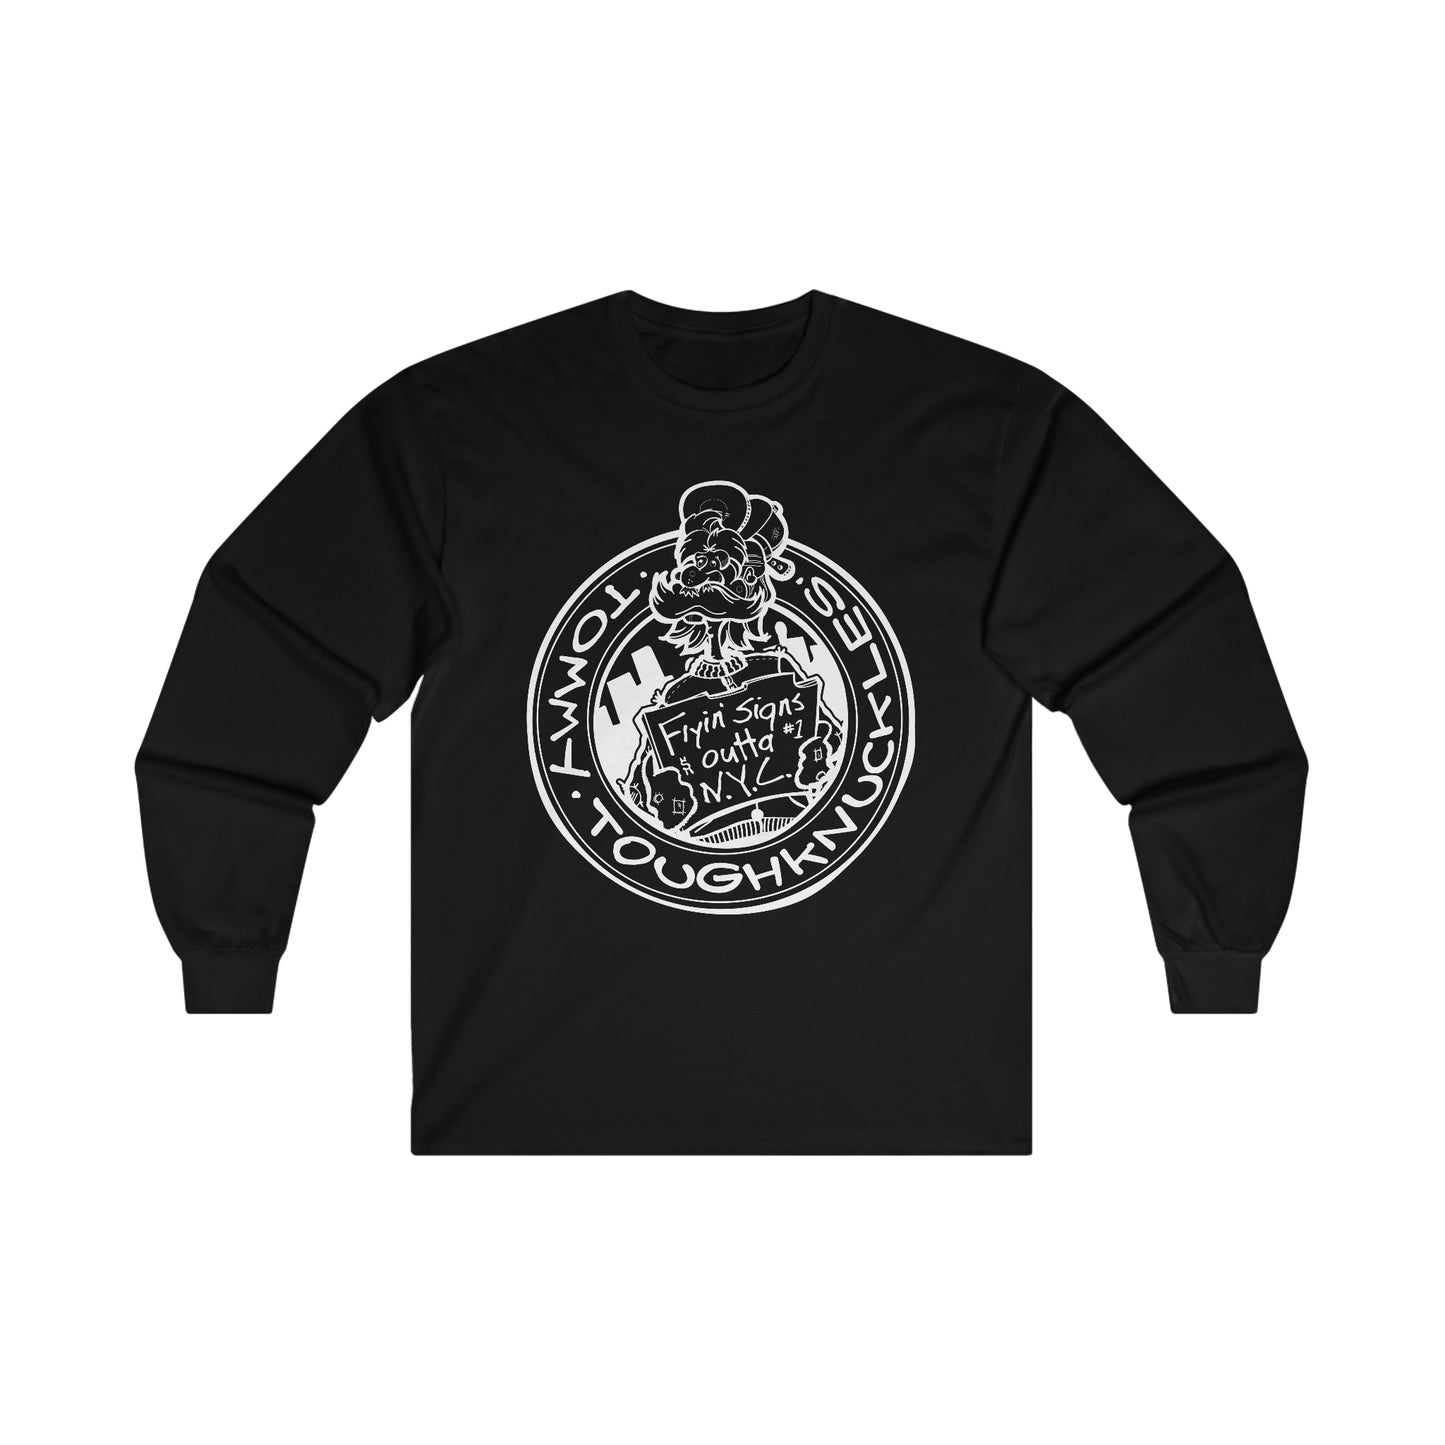 Tommy ToughKnuckles - Long Sleeve Shirt